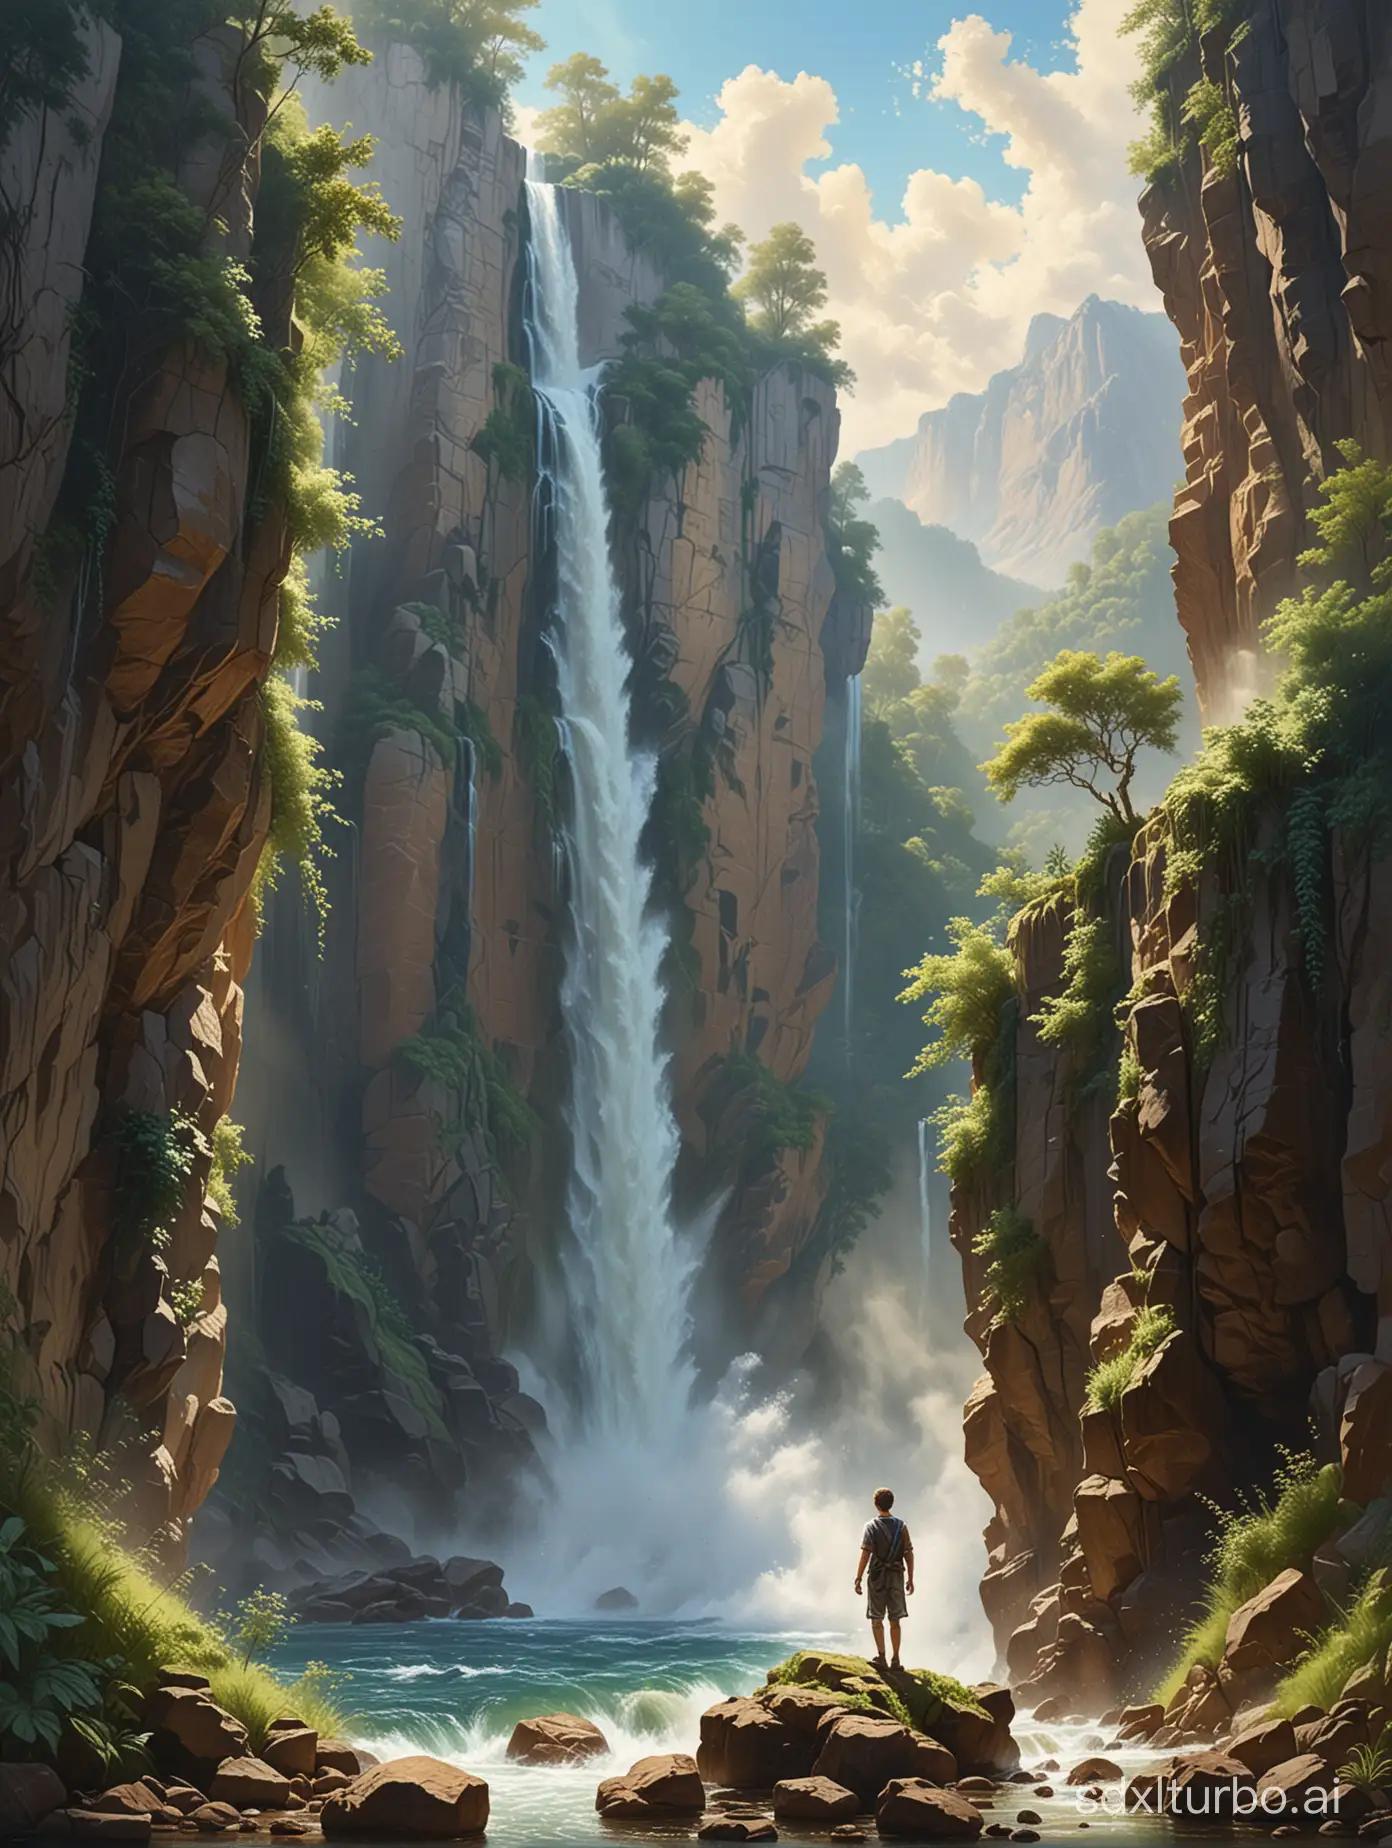 Tranquil-Waterfall-Scene-Majestic-Cliff-with-Young-Boy